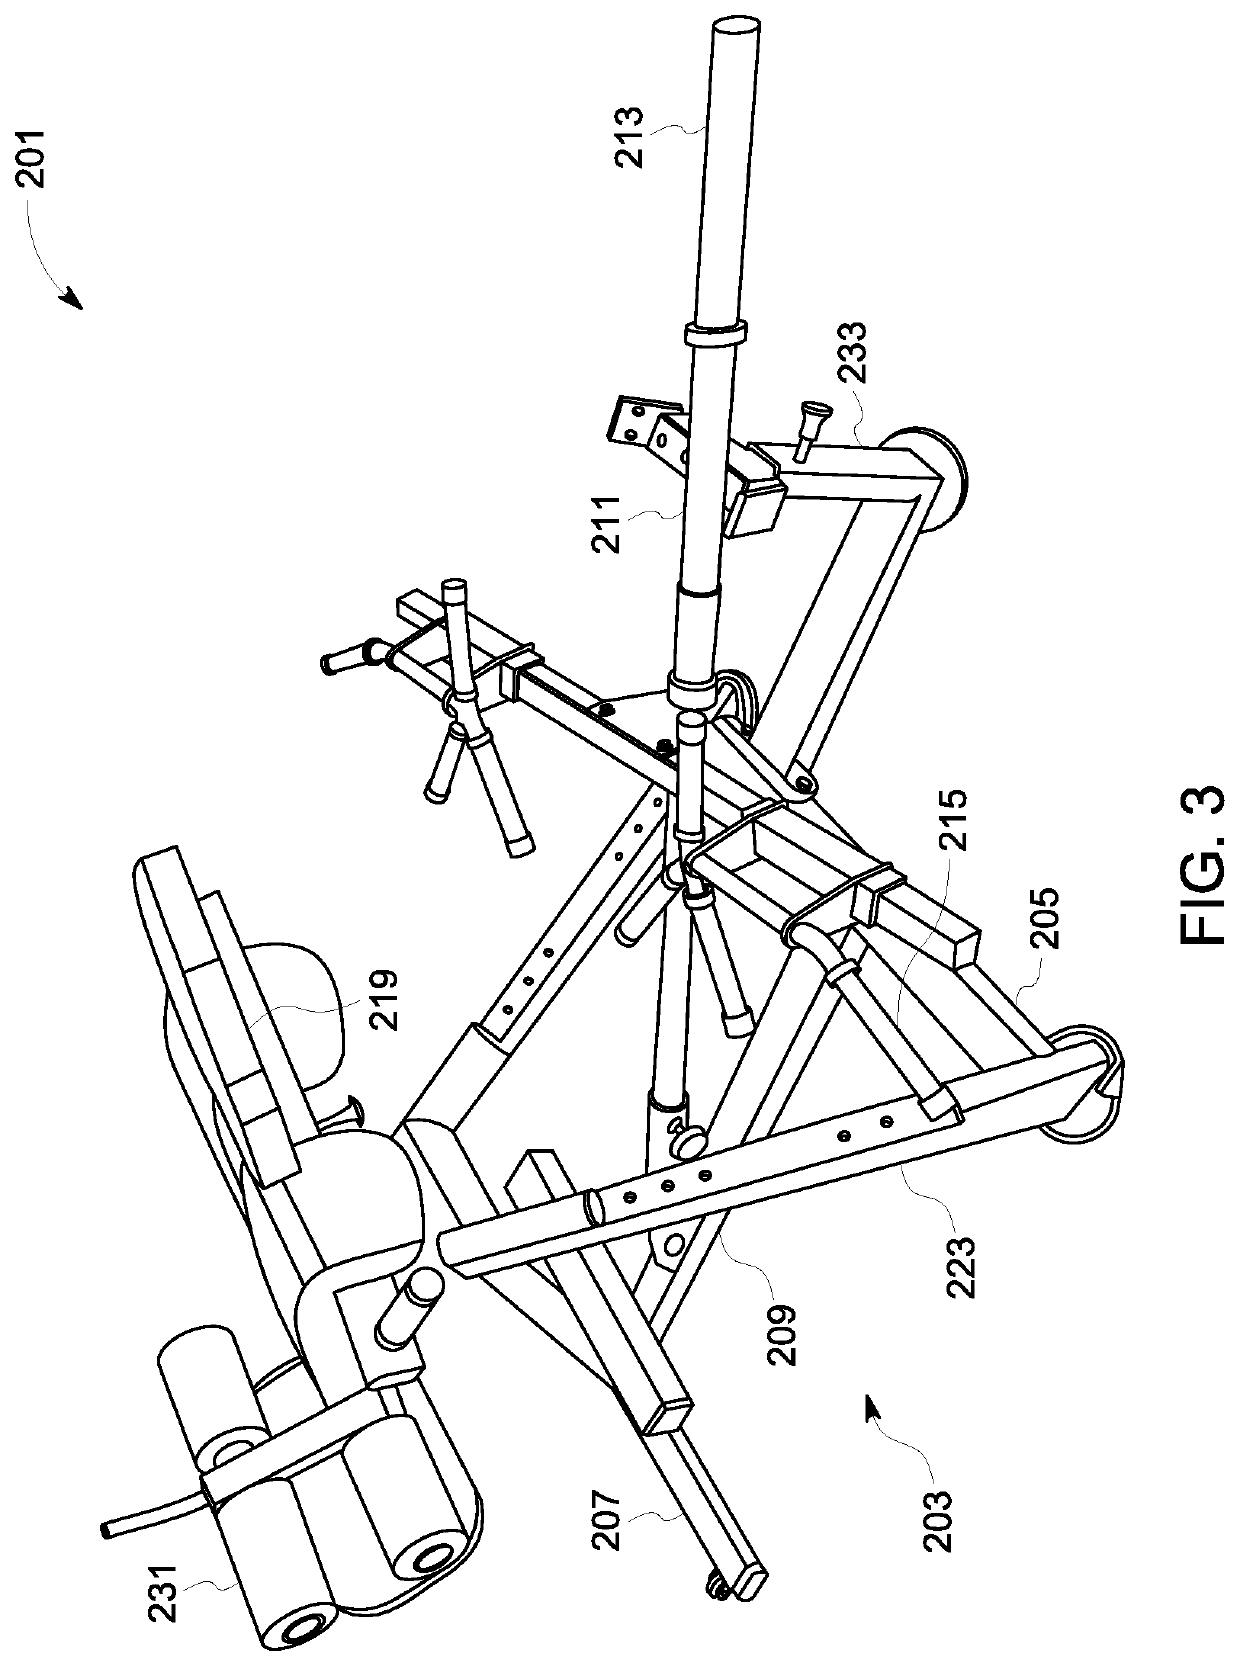 Exercise machine and method of use